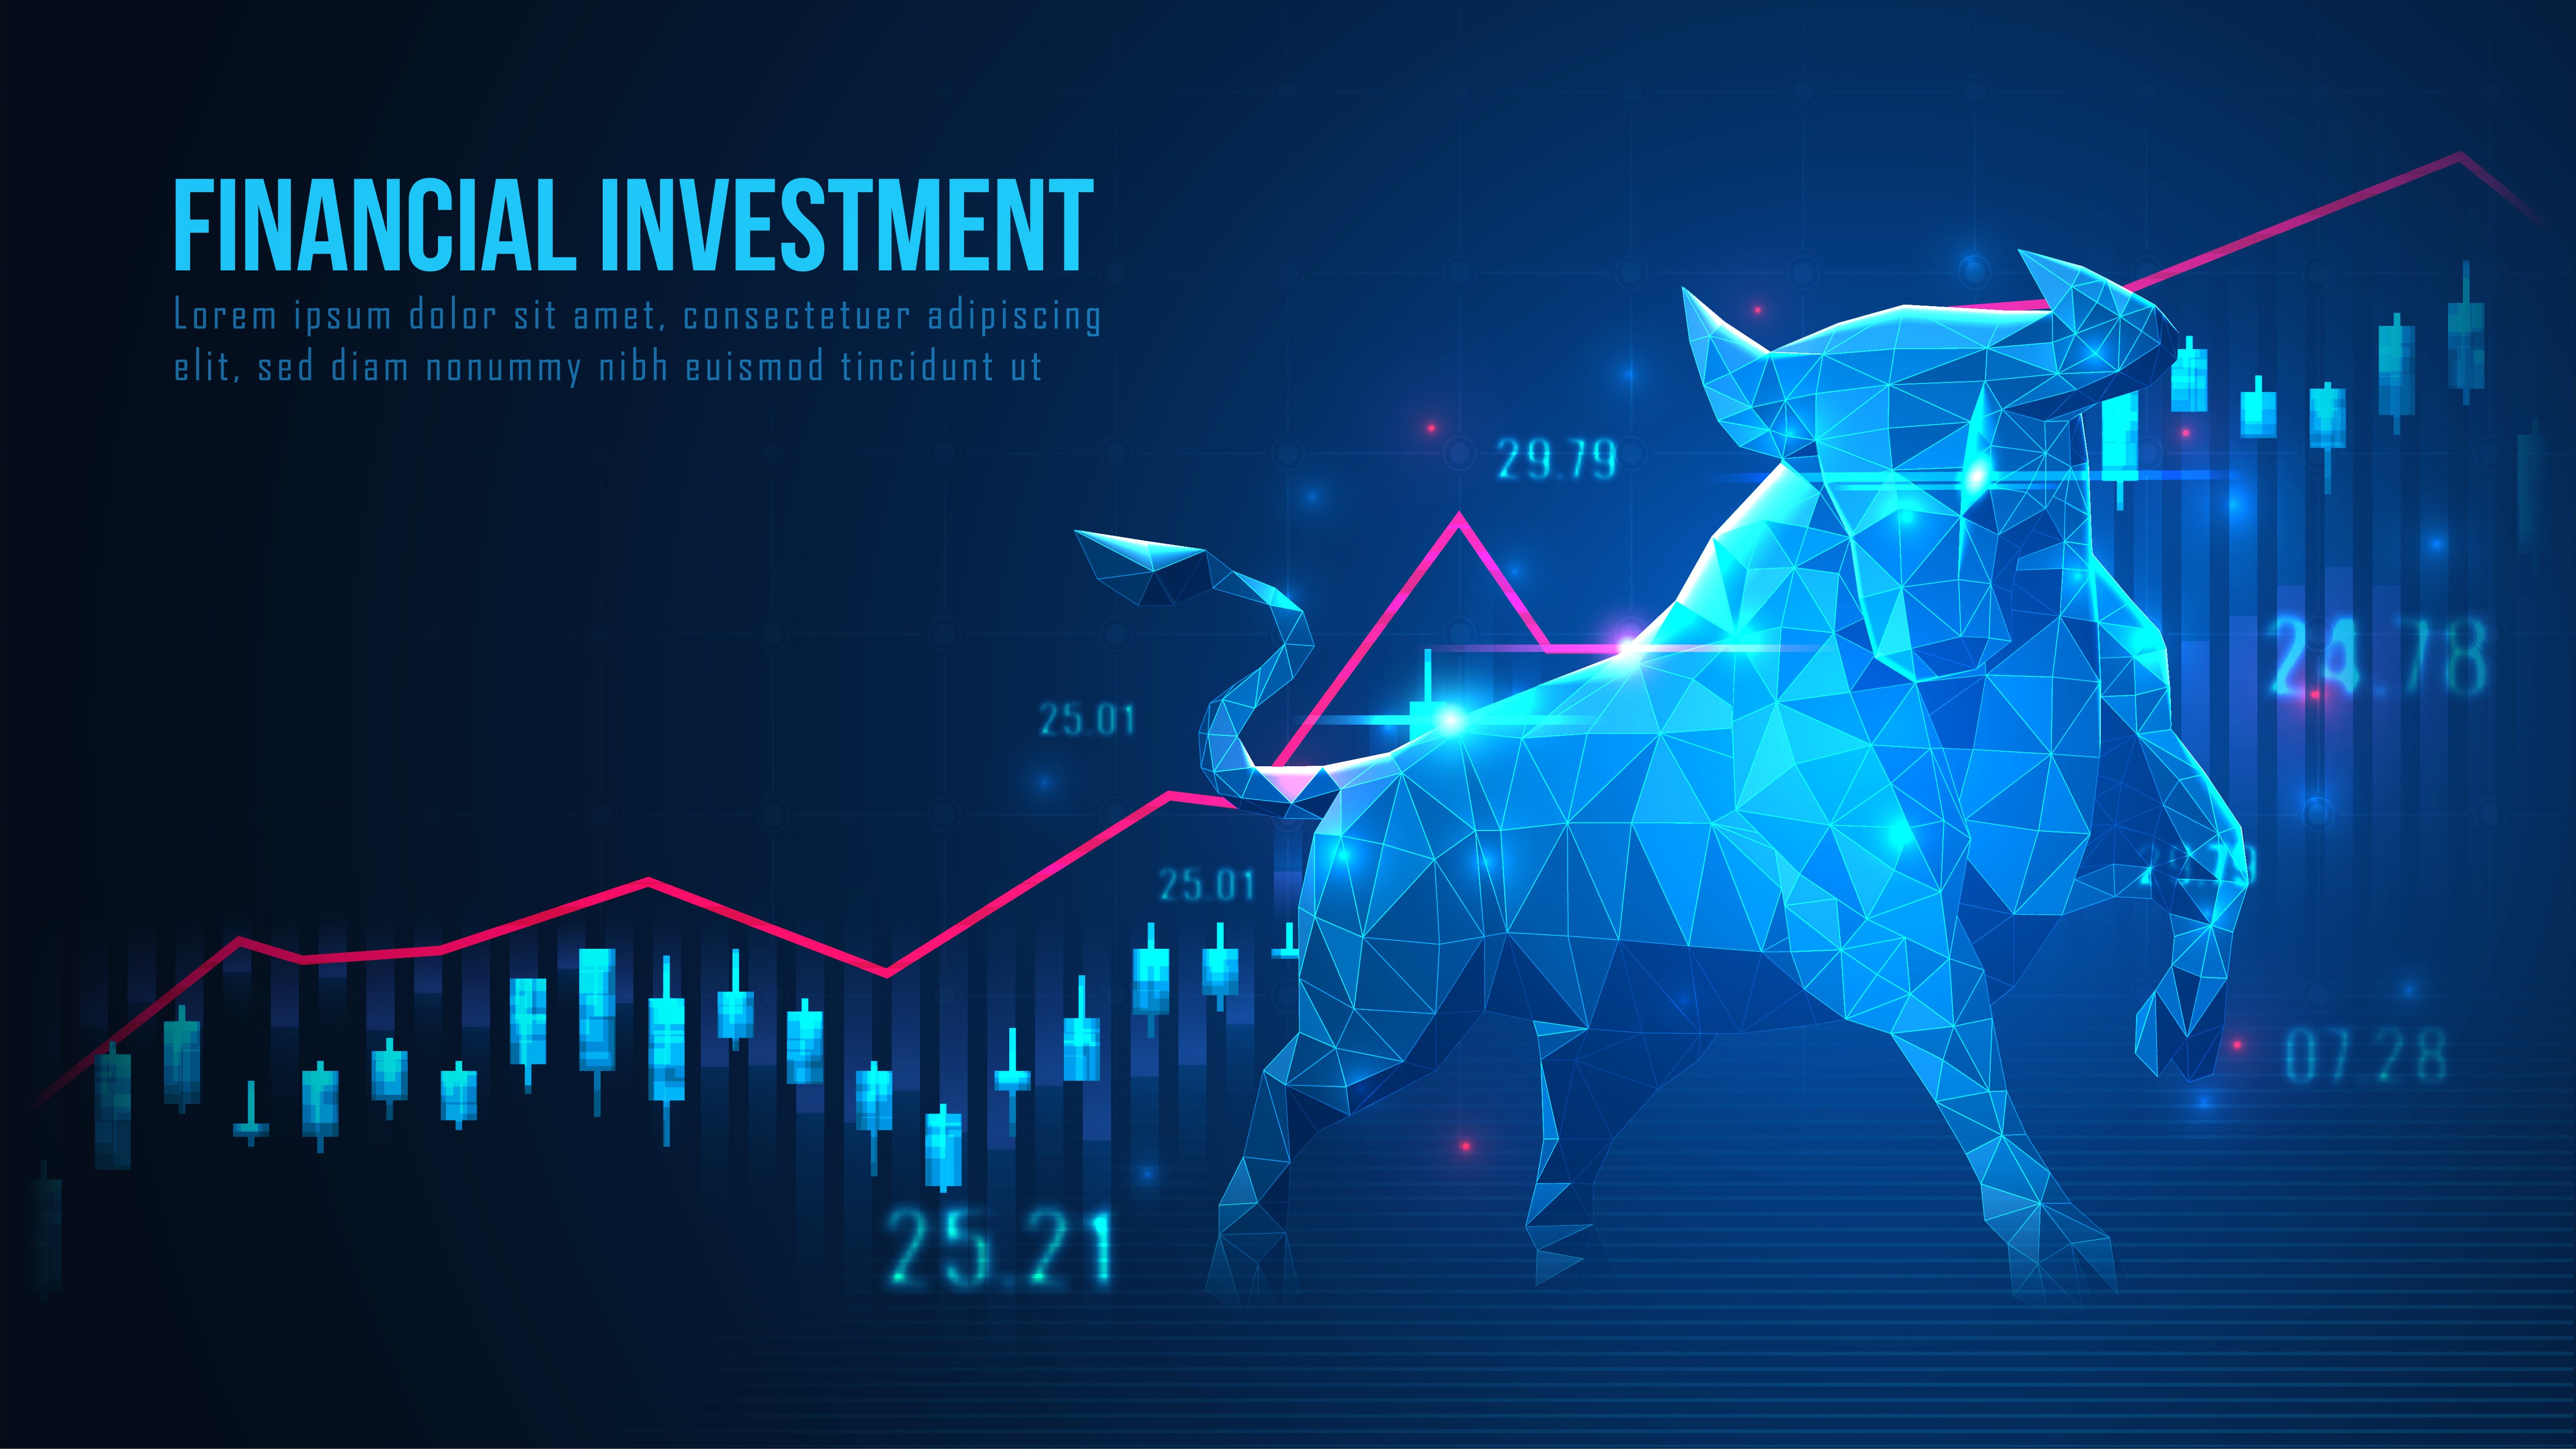 Bullish: Institutional Investors’ Entry Point Spotted, Analyst Sights Possible Upswing